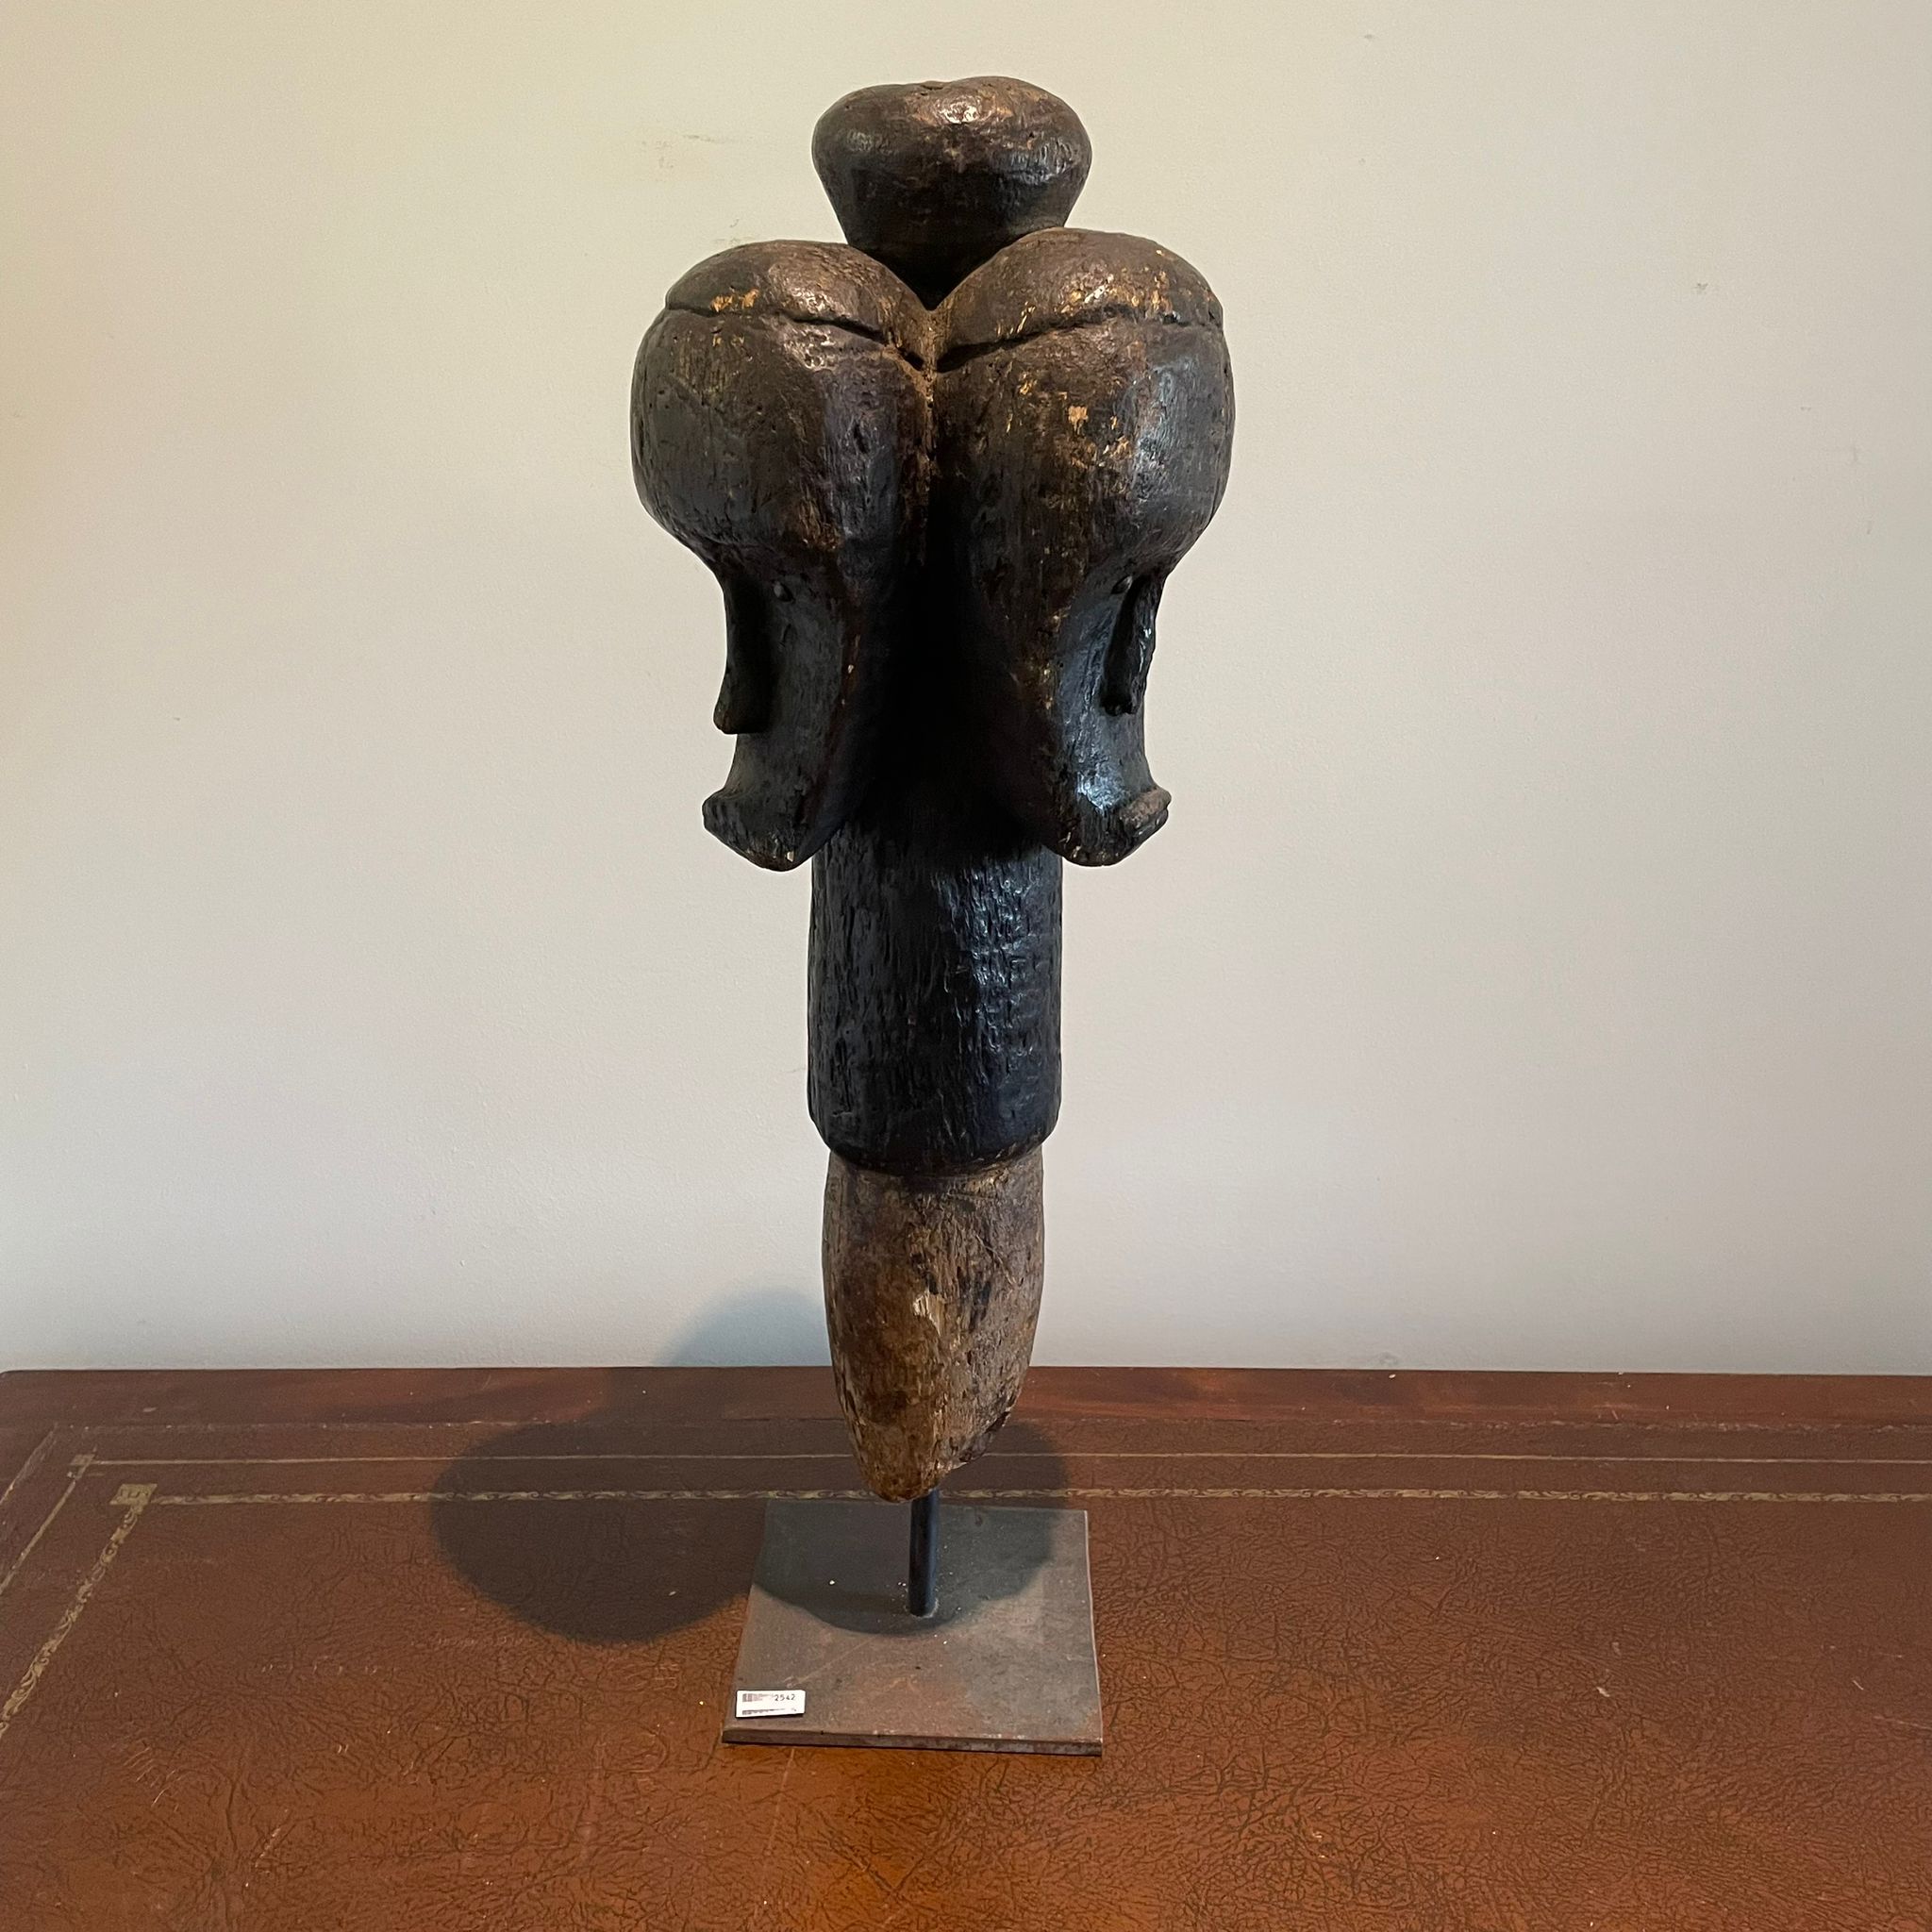 ***AWAY*** A carved African tribal three-headed marker approximately 19cm by 20cm by 62cm tall.